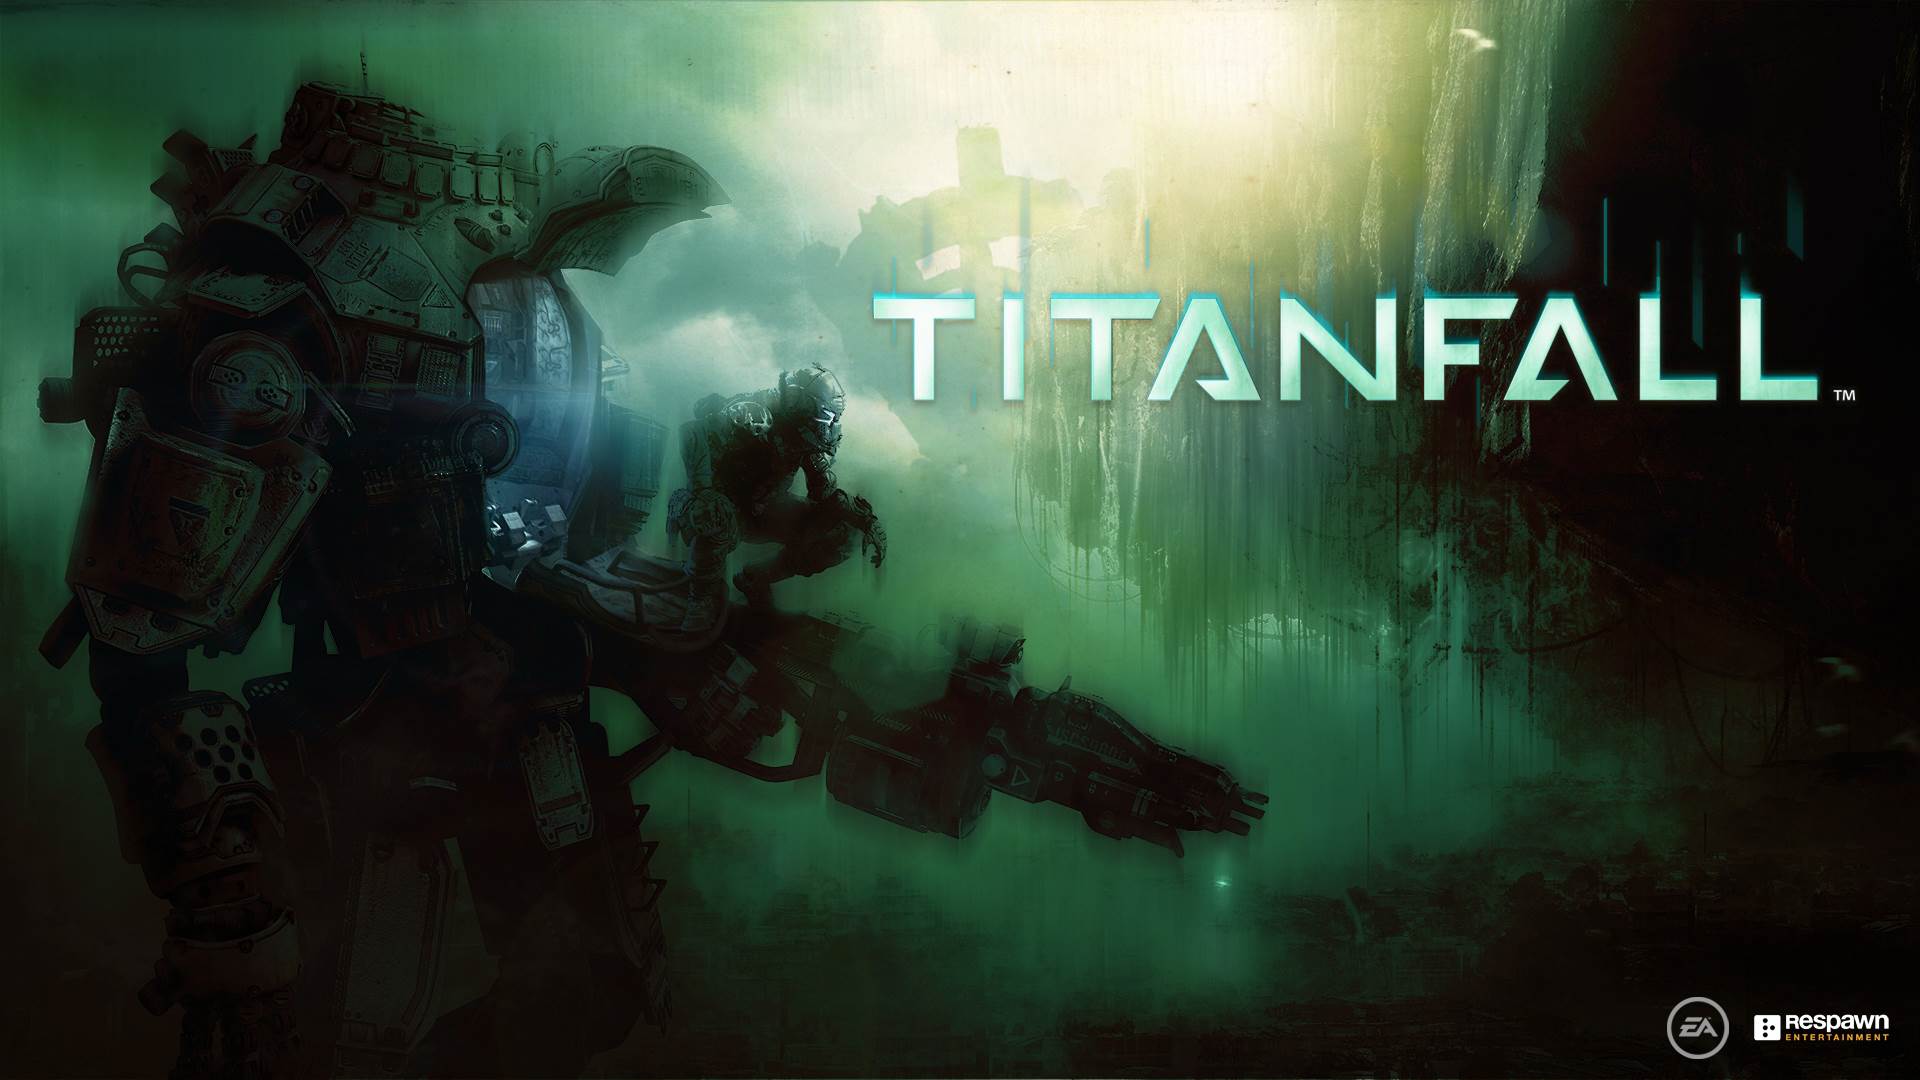 Titanfall Wallpapers in 1080P HD GamingBoltcom Video Game News